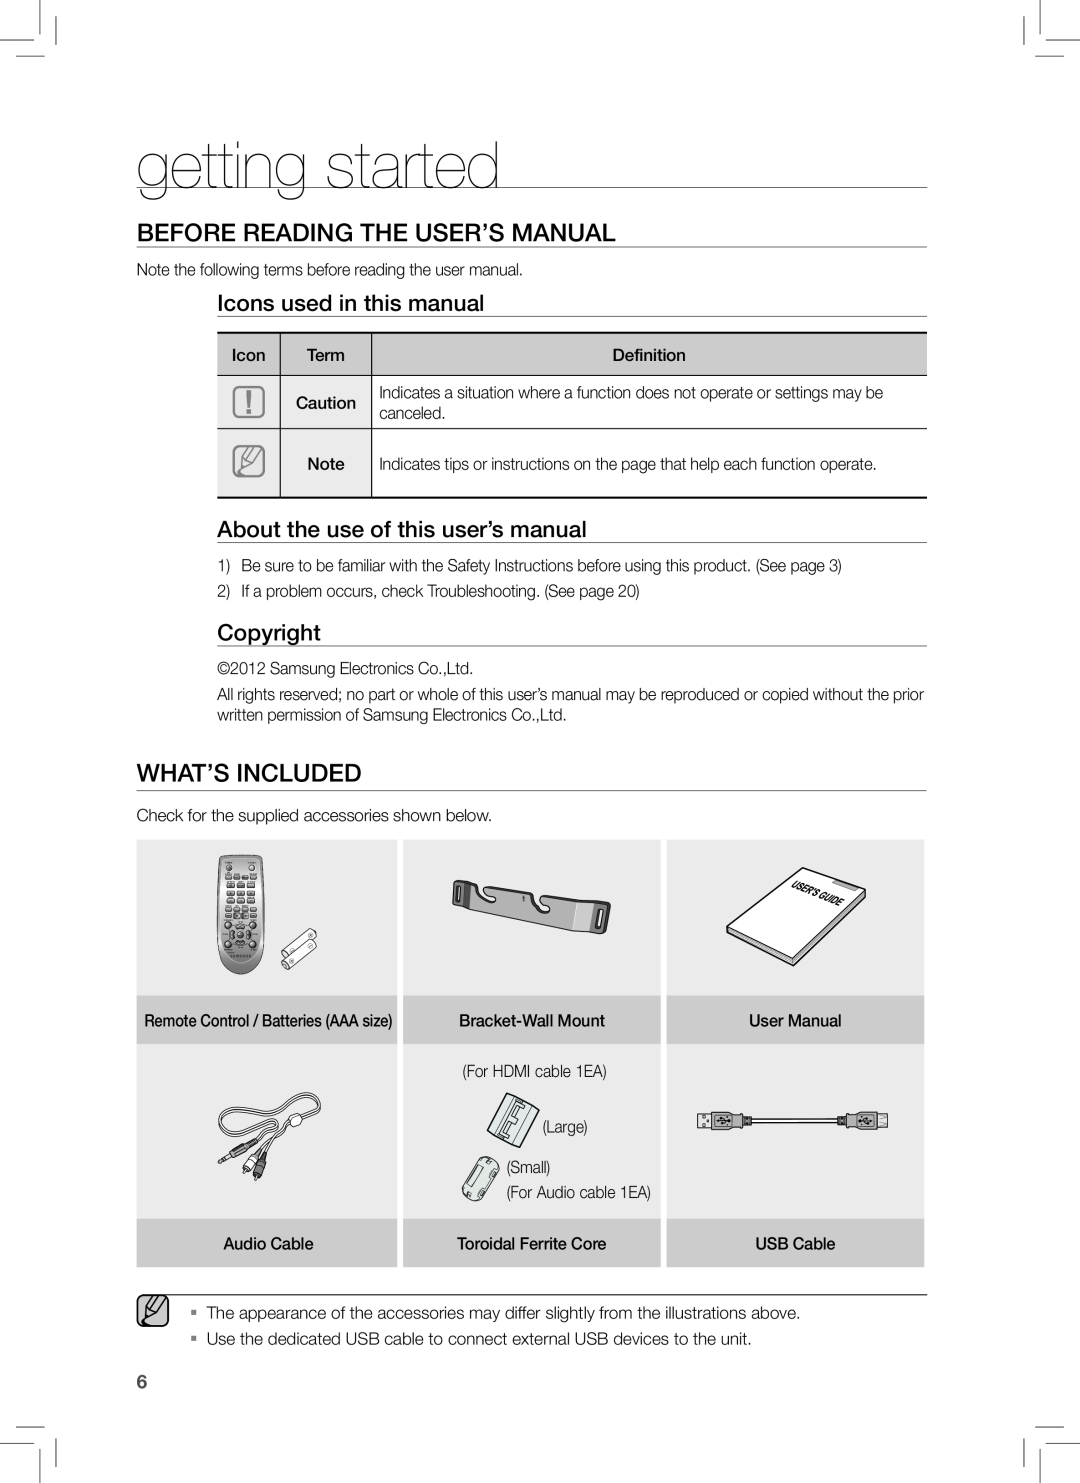 Samsung HW-E350 user manual getting started, What’S Included, Icons used in this manual, Copyright 